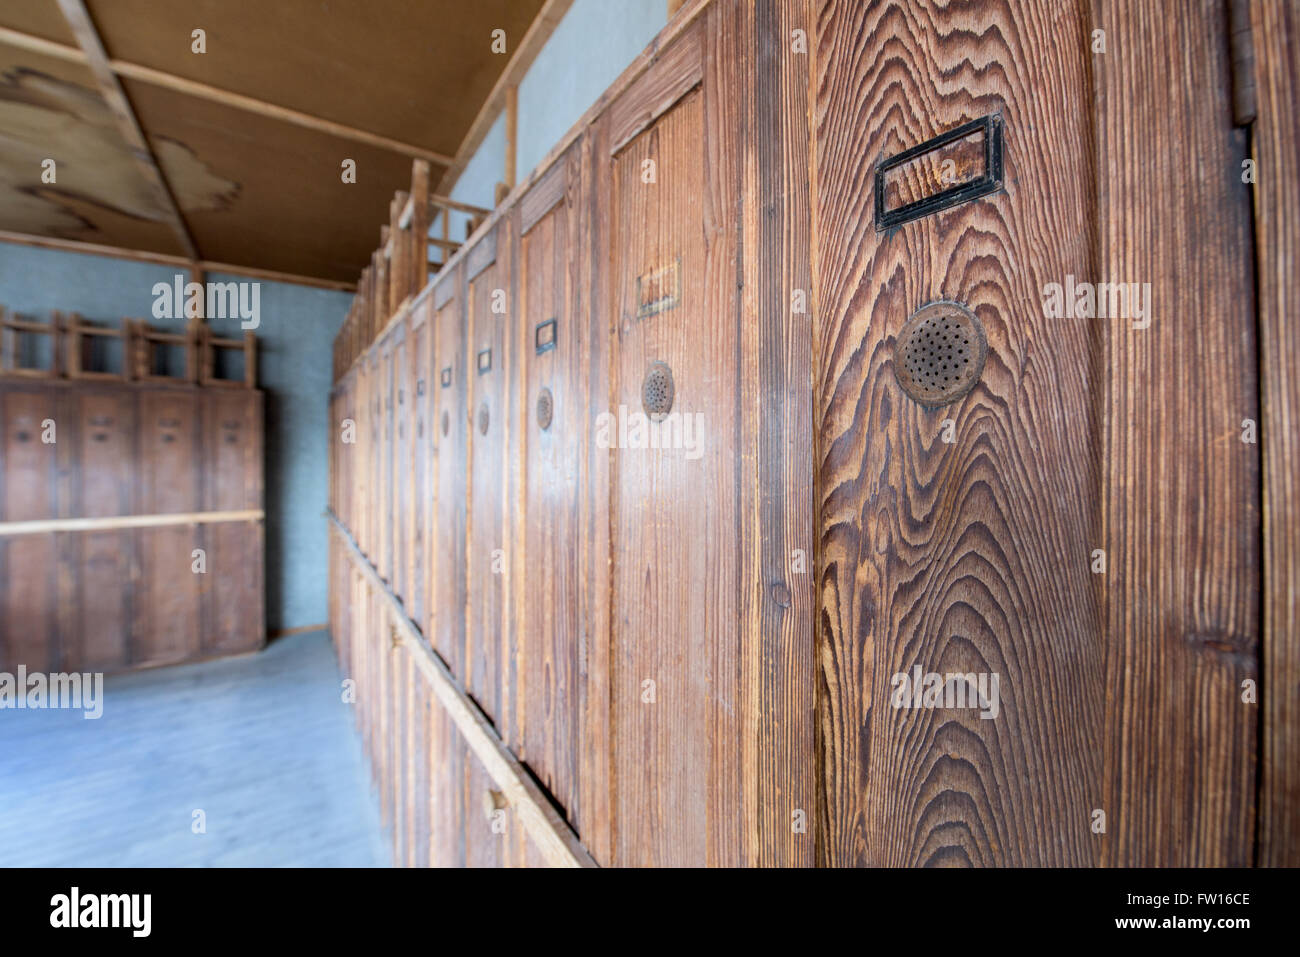 Prisoners' lockers inside the barracks in Dachau concentration camp Stock Photo